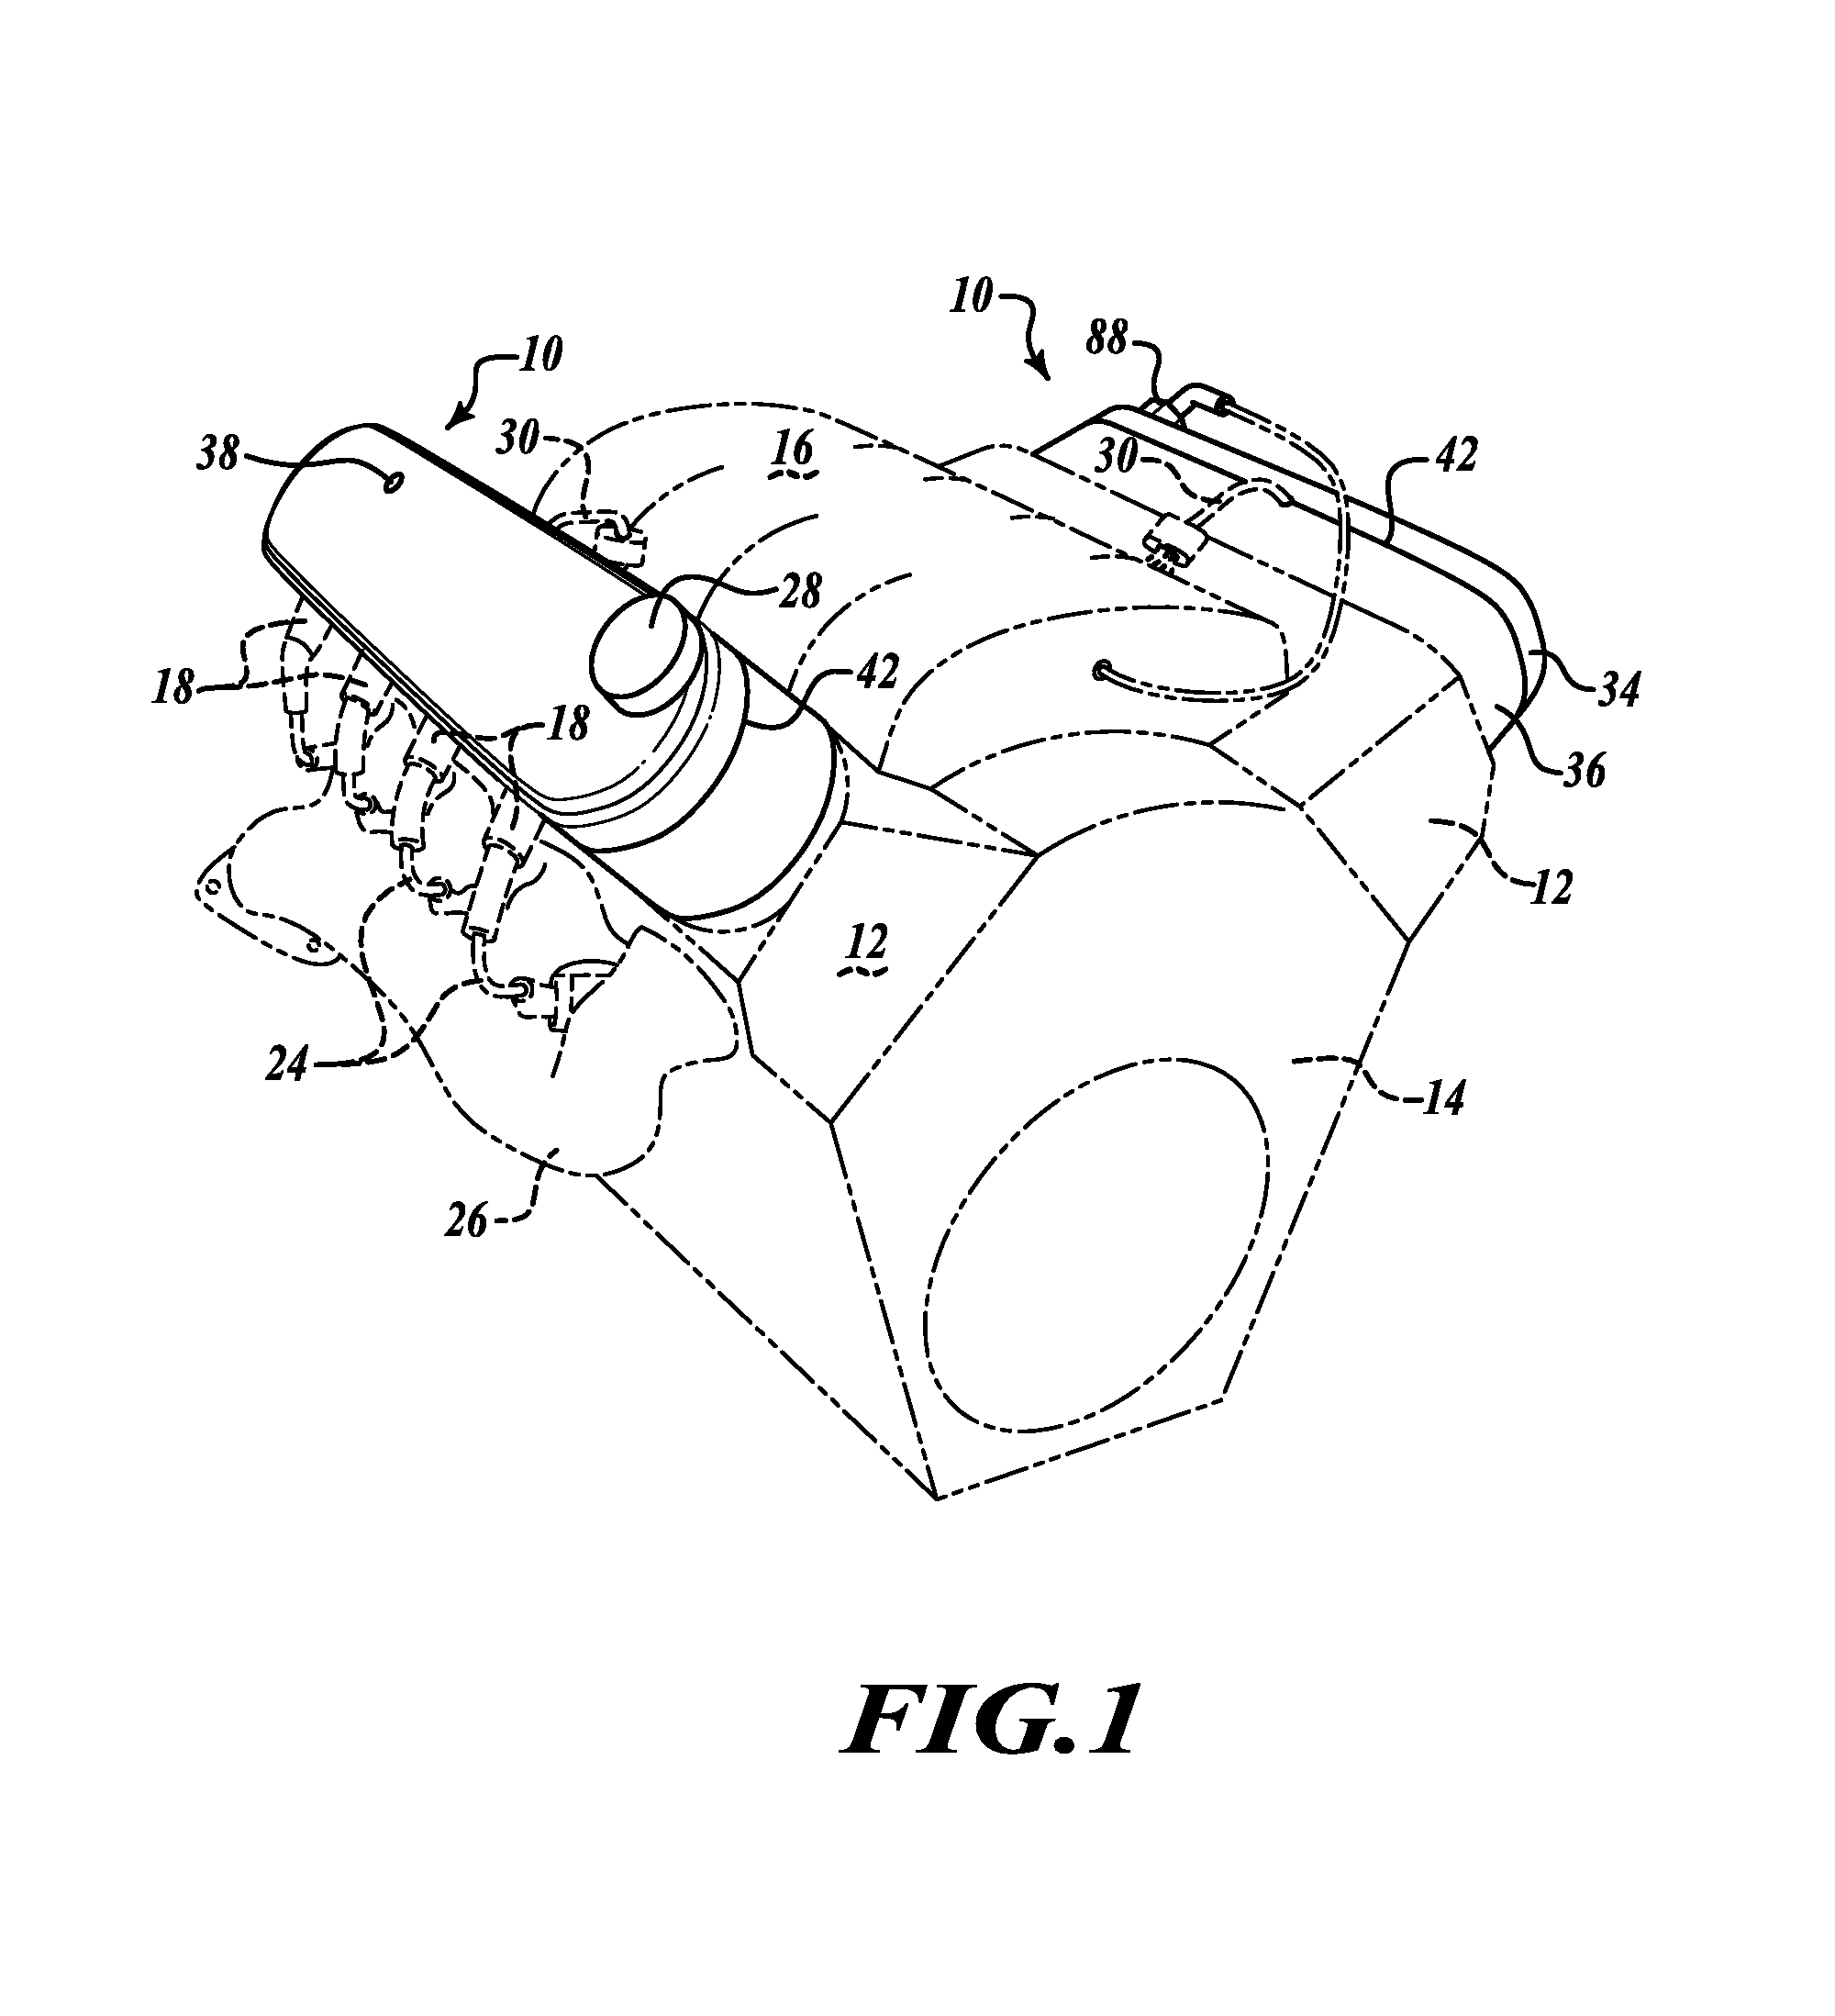 Enclosed rocker arm cover assembly having internal multi-coil mounting plate